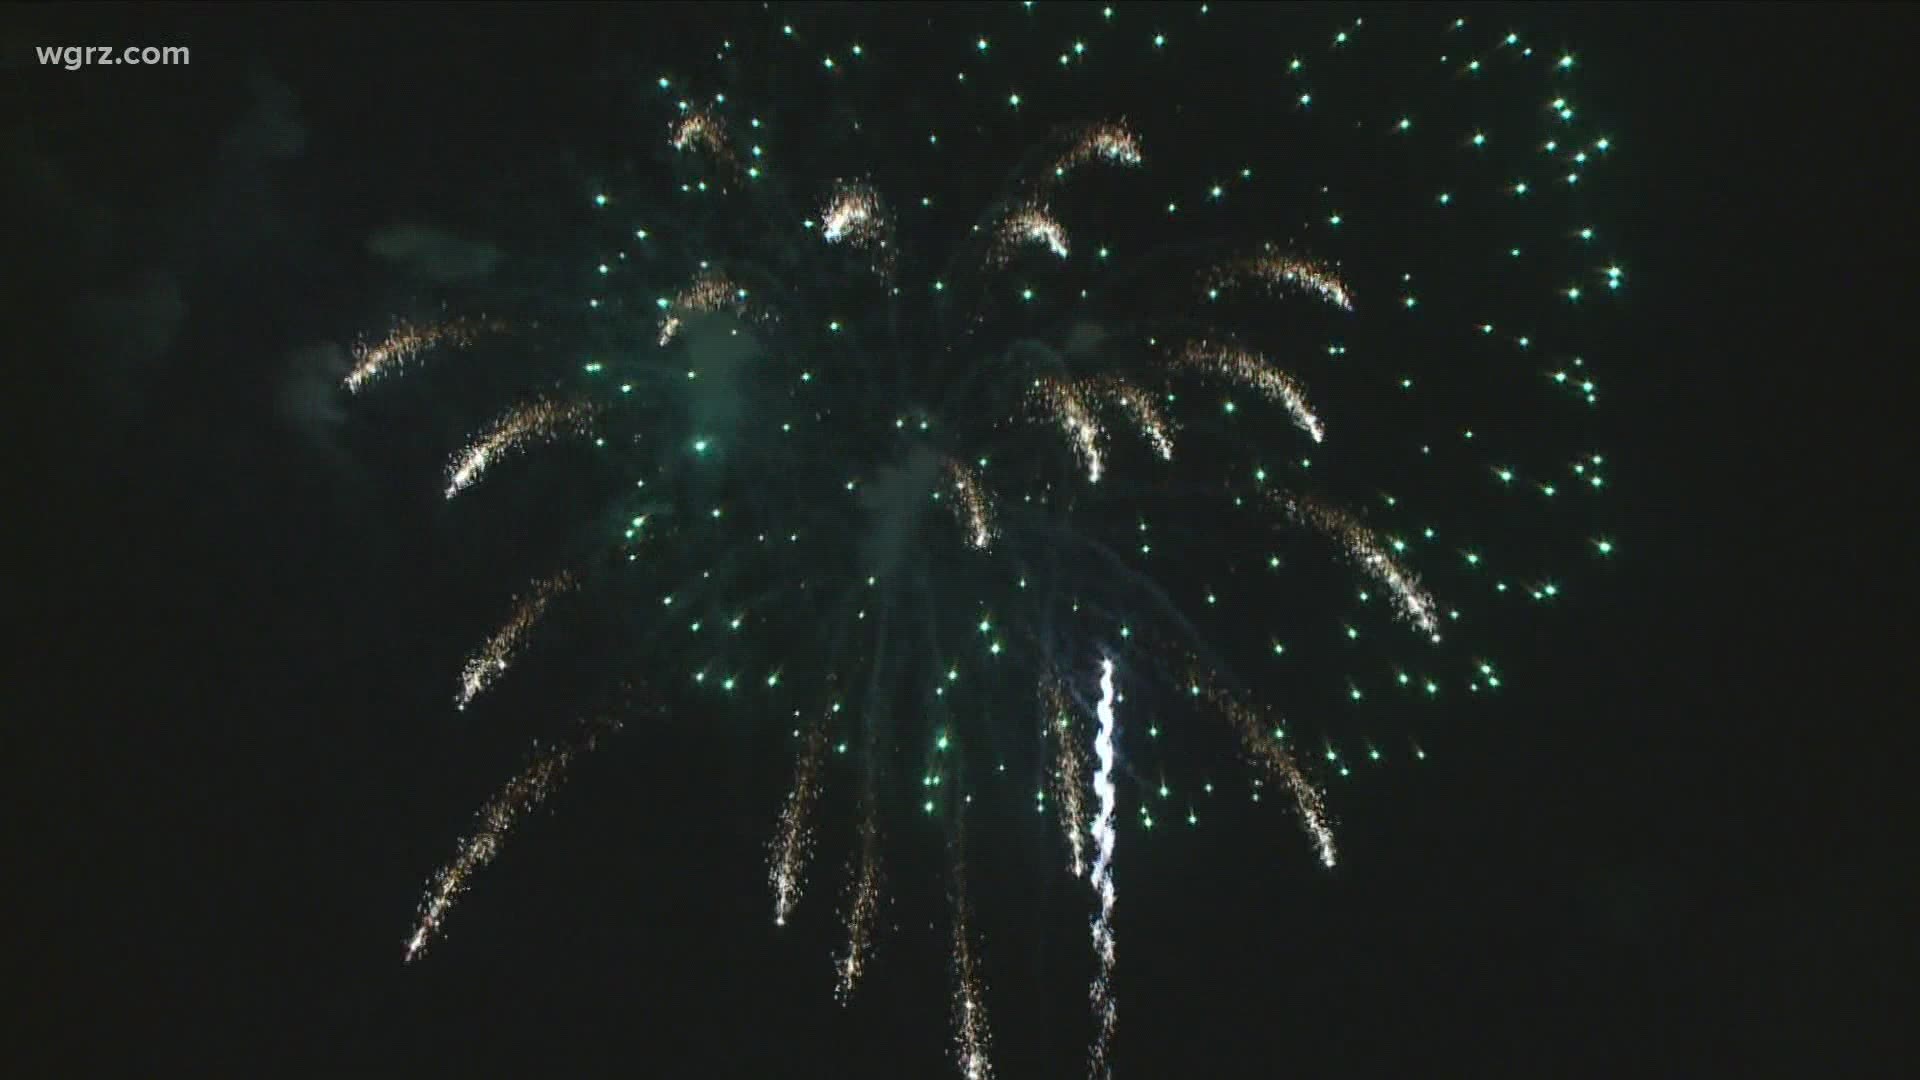 If you're tired of hearing all of the fireworks being set off over the past couple weeks you're not alone and now the state is cracking down on the illegal use.